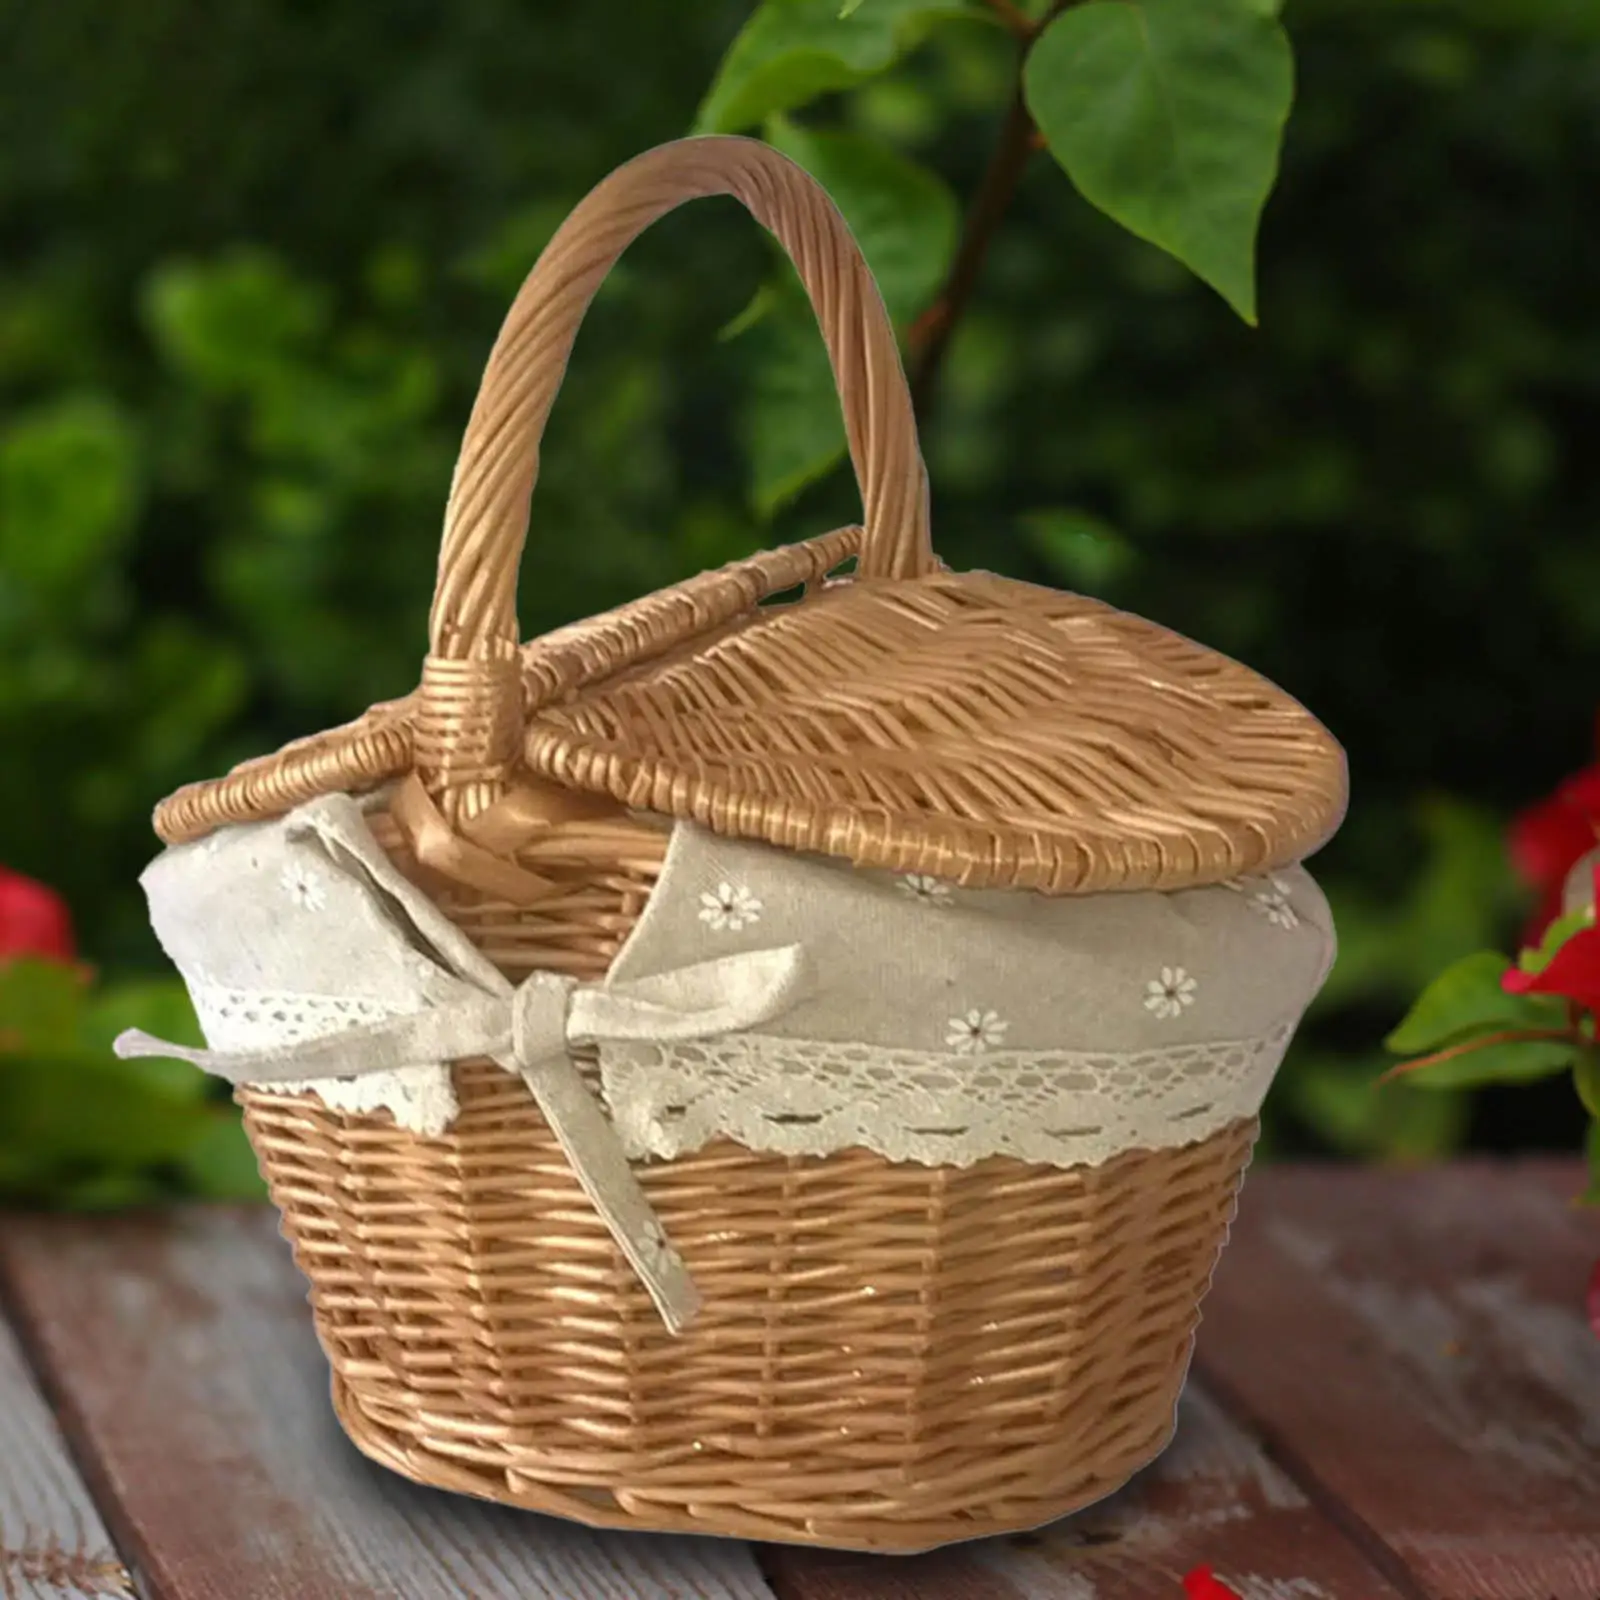 Wicker Picnic Basket with Washable Lining Rattan Storage Serving Basket for Hiking Beach